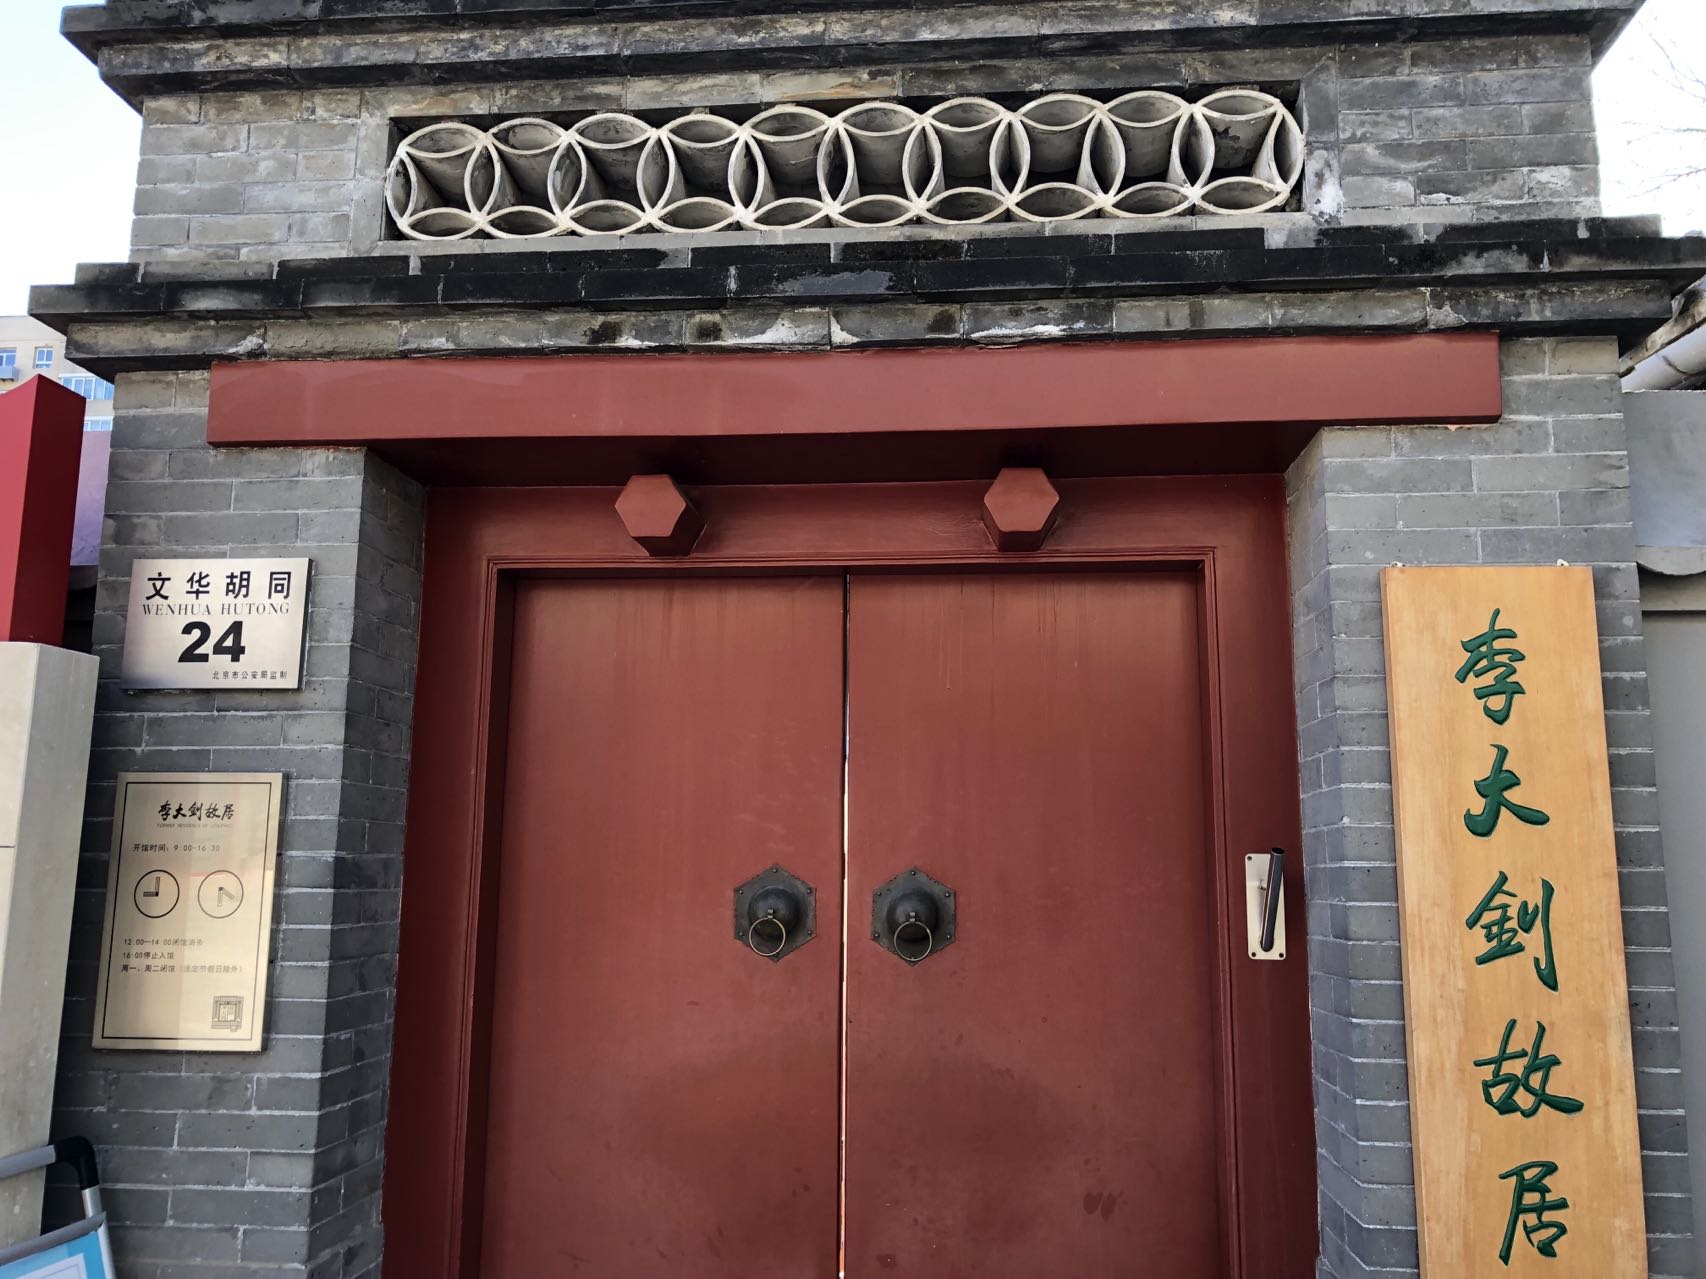 Li-Dazhao-s-former-residence-in-Wenhua-Hutong.-Image-via-That-s-Alistair-Baker-Brian.jpeg